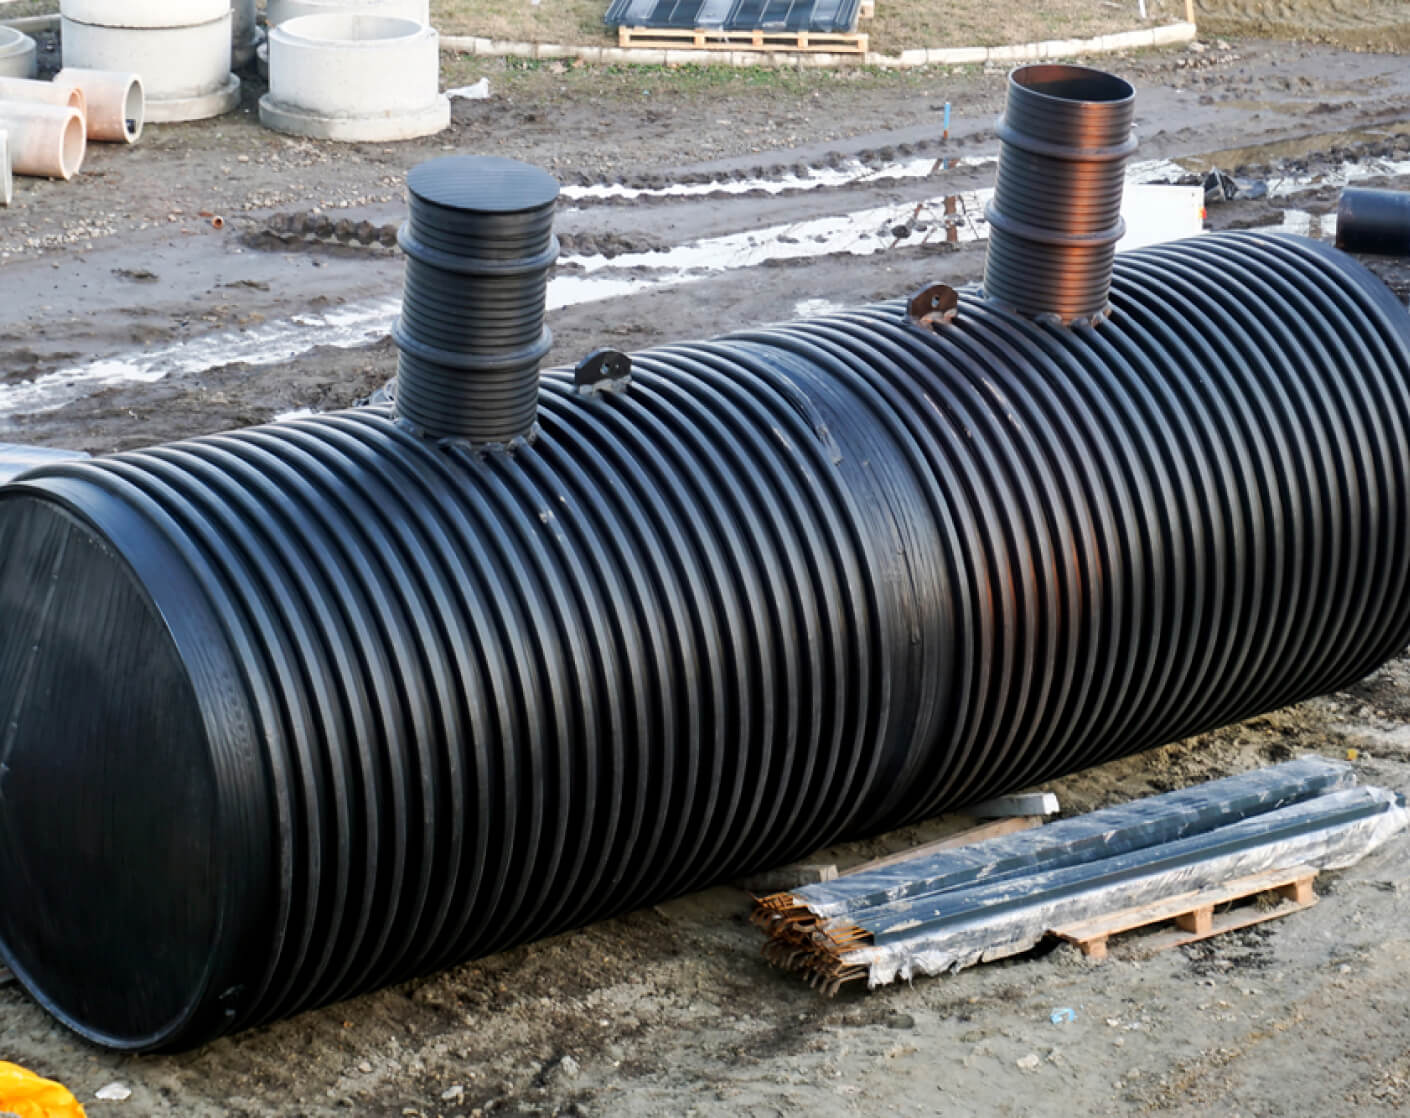 replacing an old septic tank in Mississauga